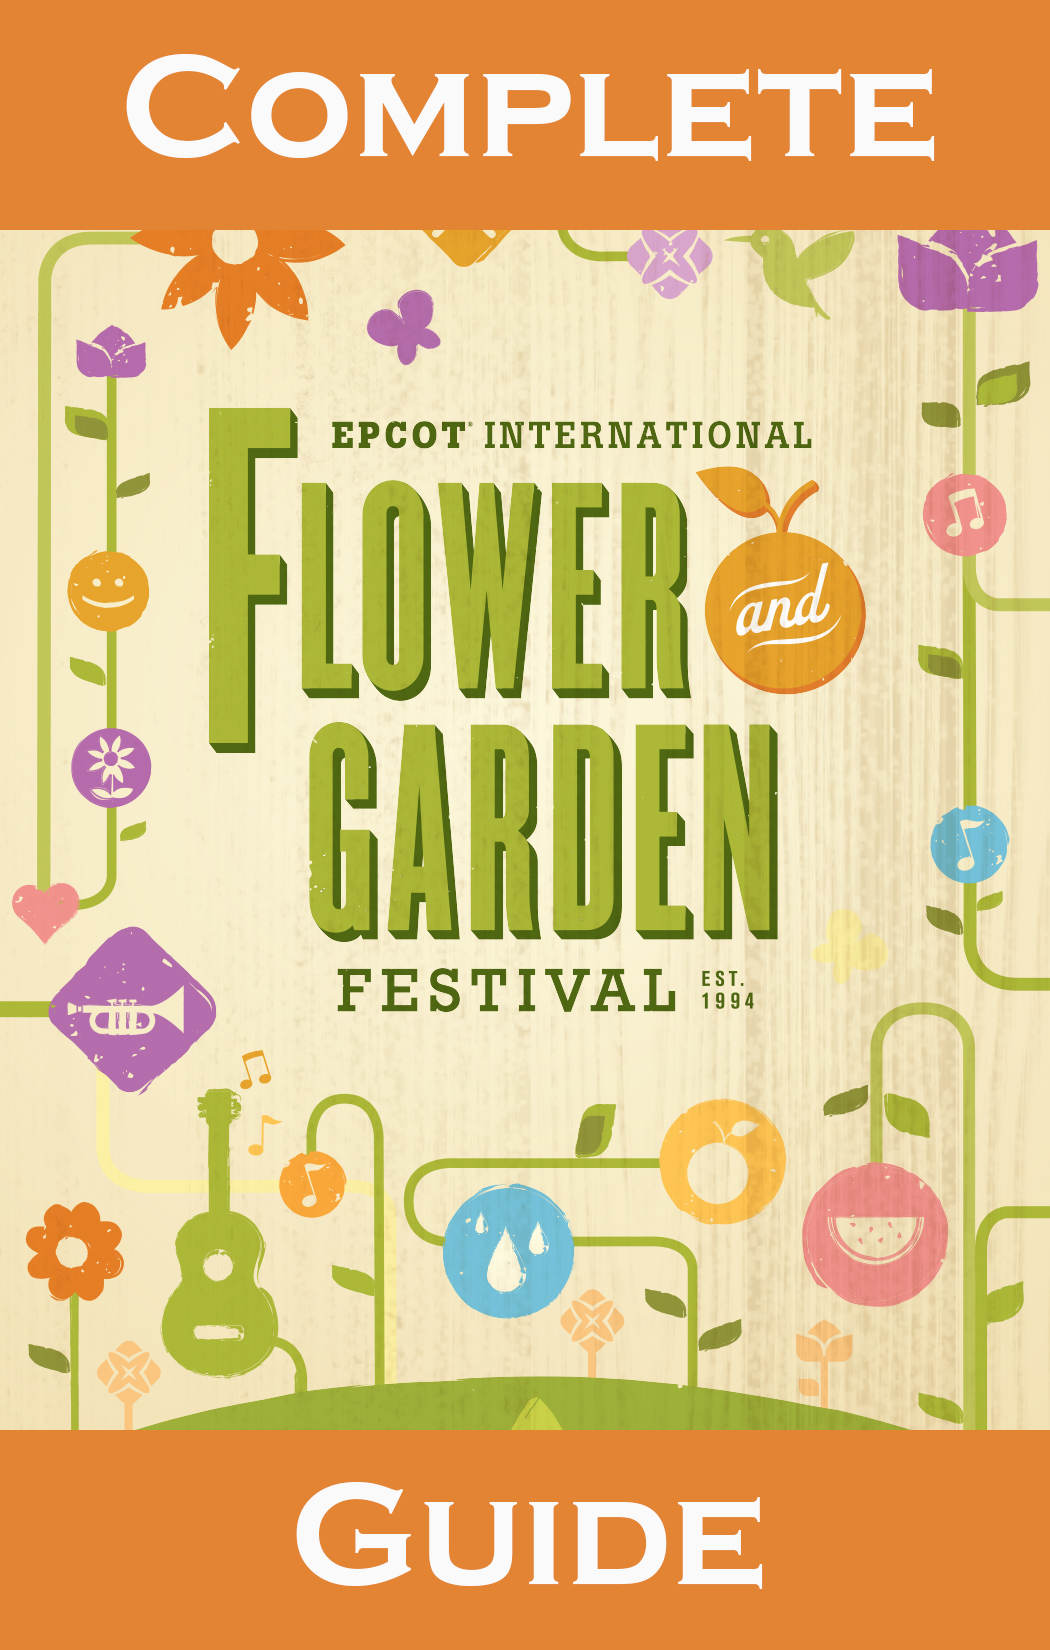 Complete Guide to Epcot's Flower and Garden Festival including menus